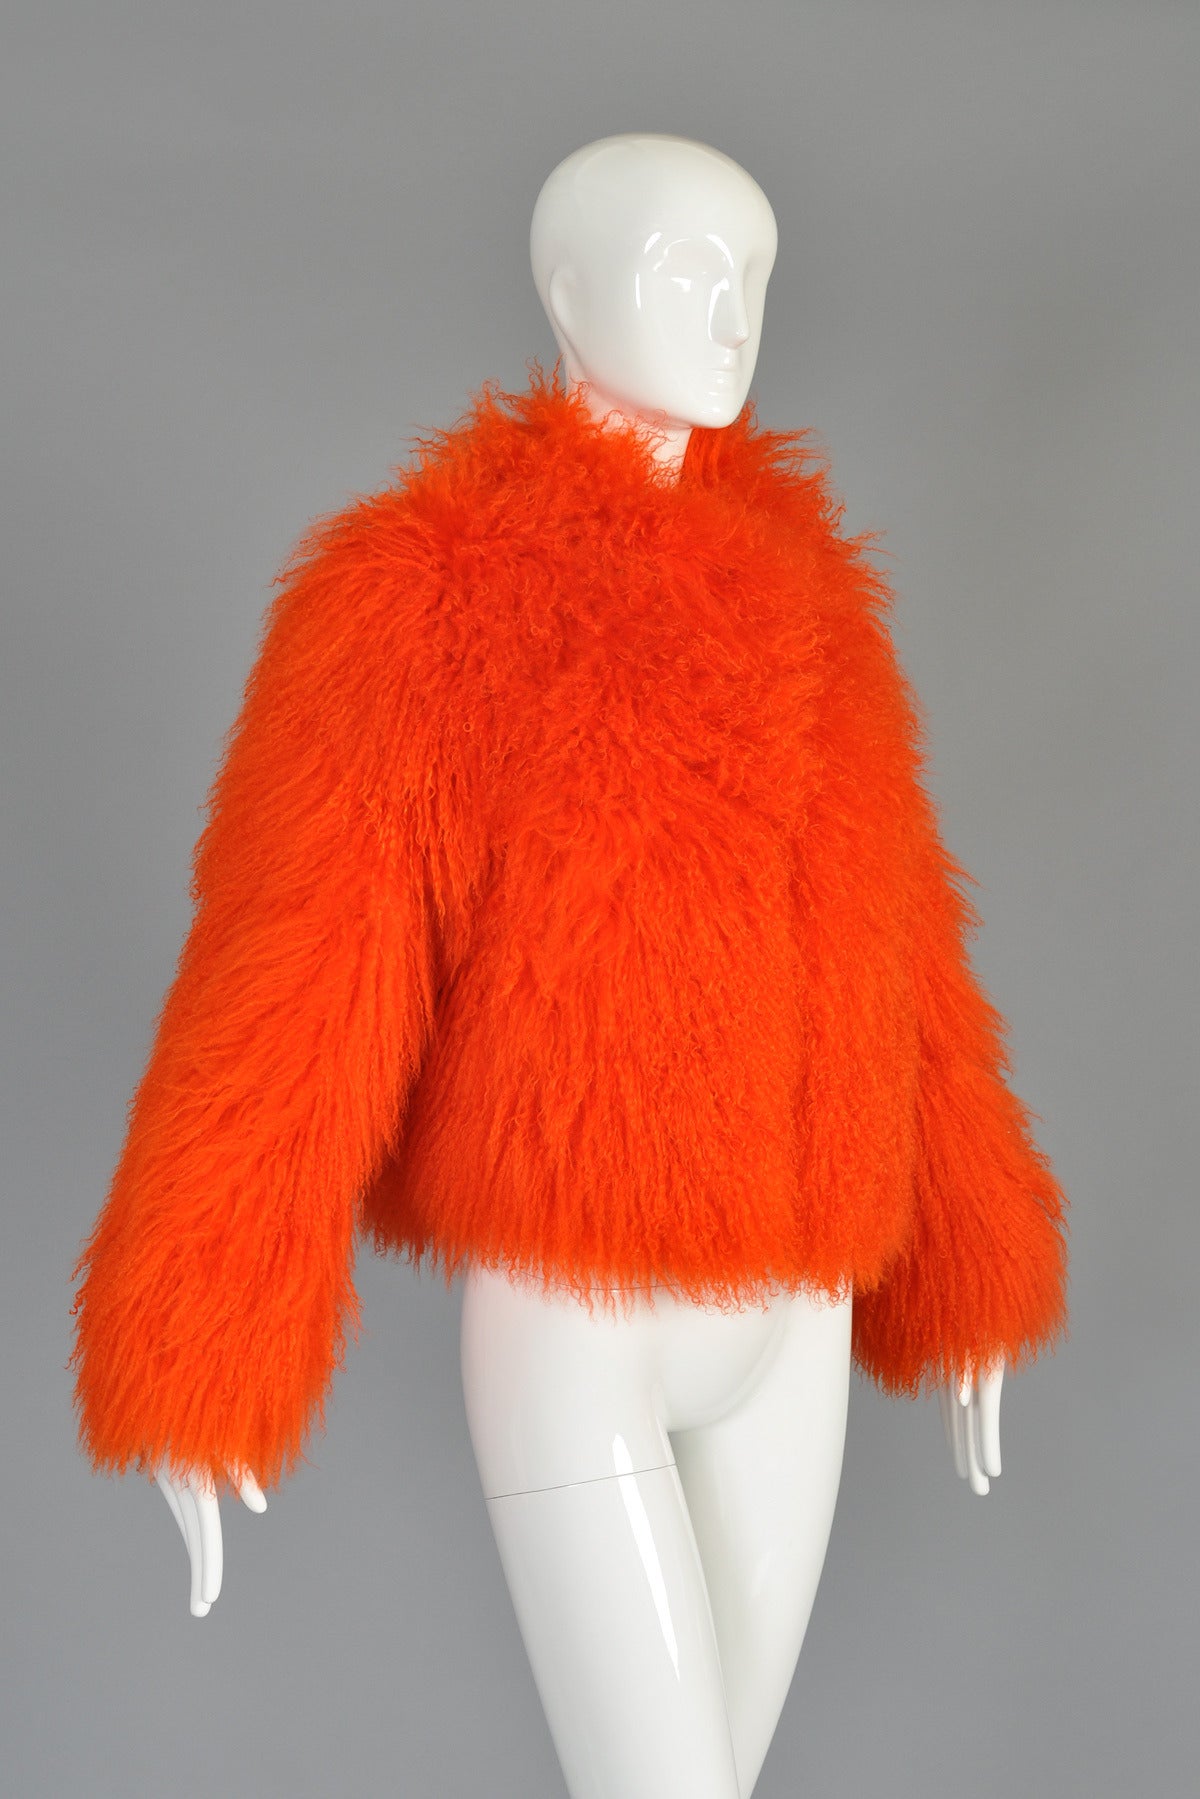 Sonia Rykiel Cropped Day-Glo Orange Mongolian Lamb Fur Coat In Excellent Condition In Yucca Valley, CA